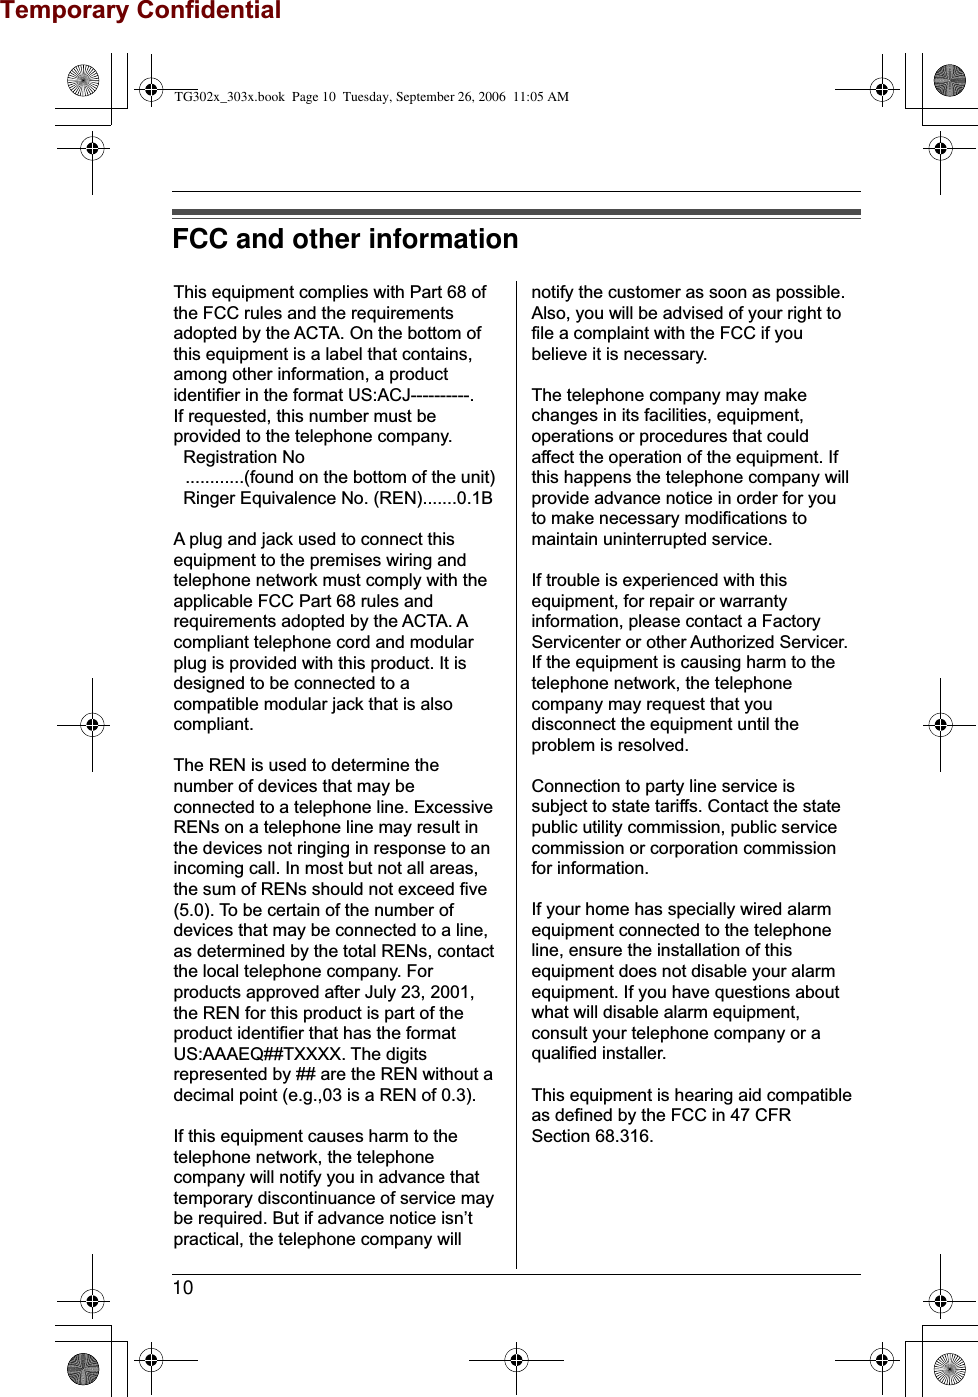 10FCC and other informationThis equipment complies with Part 68 of the FCC rules and the requirements adopted by the ACTA. On the bottom of this equipment is a label that contains, among other information, a product identifier in the format US:ACJ----------.If requested, this number must be provided to the telephone company. Registration No ............(found on the bottom of the unit) Ringer Equivalence No. (REN).......0.1BA plug and jack used to connect this equipment to the premises wiring and telephone network must comply with the applicable FCC Part 68 rules and requirements adopted by the ACTA. A compliant telephone cord and modular plug is provided with this product. It is designed to be connected to a compatible modular jack that is also compliant.The REN is used to determine the number of devices that may be connected to a telephone line. Excessive RENs on a telephone line may result in the devices not ringing in response to an incoming call. In most but not all areas, the sum of RENs should not exceed five (5.0). To be certain of the number of devices that may be connected to a line, as determined by the total RENs, contact the local telephone company. For products approved after July 23, 2001, the REN for this product is part of the product identifier that has the format US:AAAEQ##TXXXX. The digits represented by ## are the REN without a decimal point (e.g.,03 is a REN of 0.3).If this equipment causes harm to the telephone network, the telephone company will notify you in advance that  temporary discontinuance of service may be required. But if advance notice isn’t practical, the telephone company will notify the customer as soon as possible. Also, you will be advised of your right to file a complaint with the FCC if you believe it is necessary.The telephone company may make changes in its facilities, equipment, operations or procedures that could affect the operation of the equipment. If this happens the telephone company will provide advance notice in order for you to make necessary modifications to maintain uninterrupted service.If trouble is experienced with this equipment, for repair or warranty information, please contact a Factory Servicenter or other Authorized Servicer. If the equipment is causing harm to the telephone network, the telephone company may request that you disconnect the equipment until the problem is resolved.Connection to party line service is subject to state tariffs. Contact the state public utility commission, public service commission or corporation commission for information.If your home has specially wired alarm equipment connected to the telephone line, ensure the installation of this equipment does not disable your alarm equipment. If you have questions about what will disable alarm equipment, consult your telephone company or a qualified installer.This equipment is hearing aid compatible as defined by the FCC in 47 CFR Section 68.316.TG302x_303x.book  Page 10  Tuesday, September 26, 2006  11:05 AMTemporary Confidential